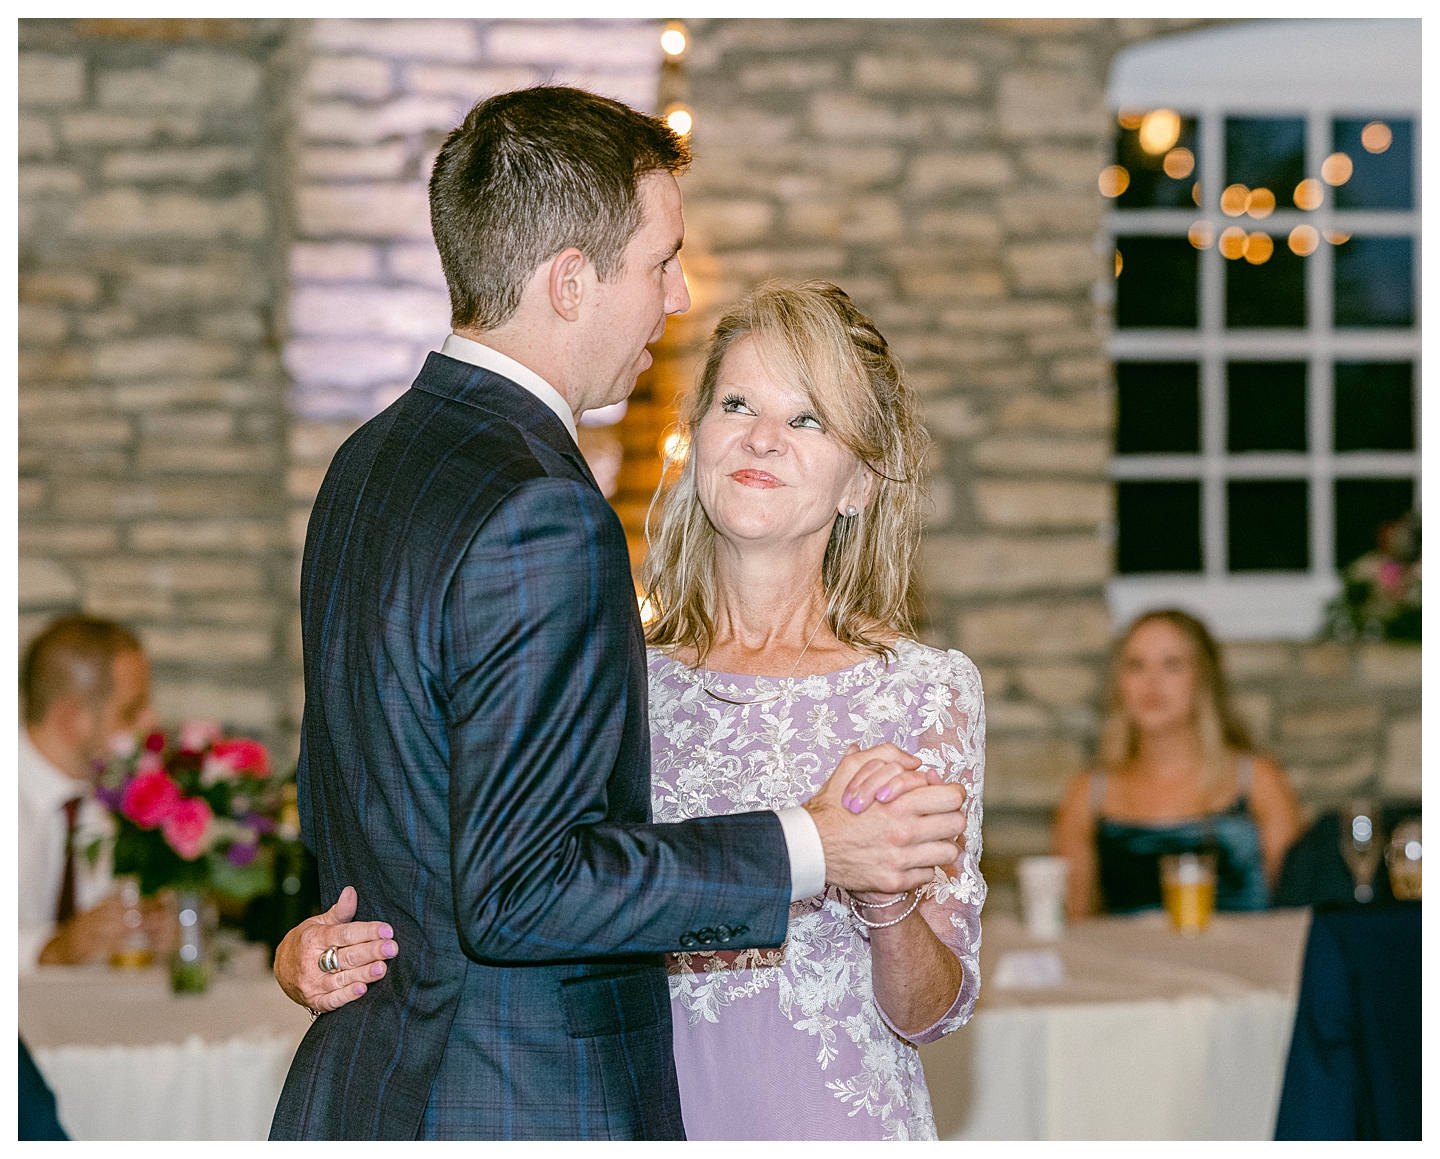 The groom dances with his mom at a Mayowood Stone Barn Wedding. Photo by Kayla Lee.